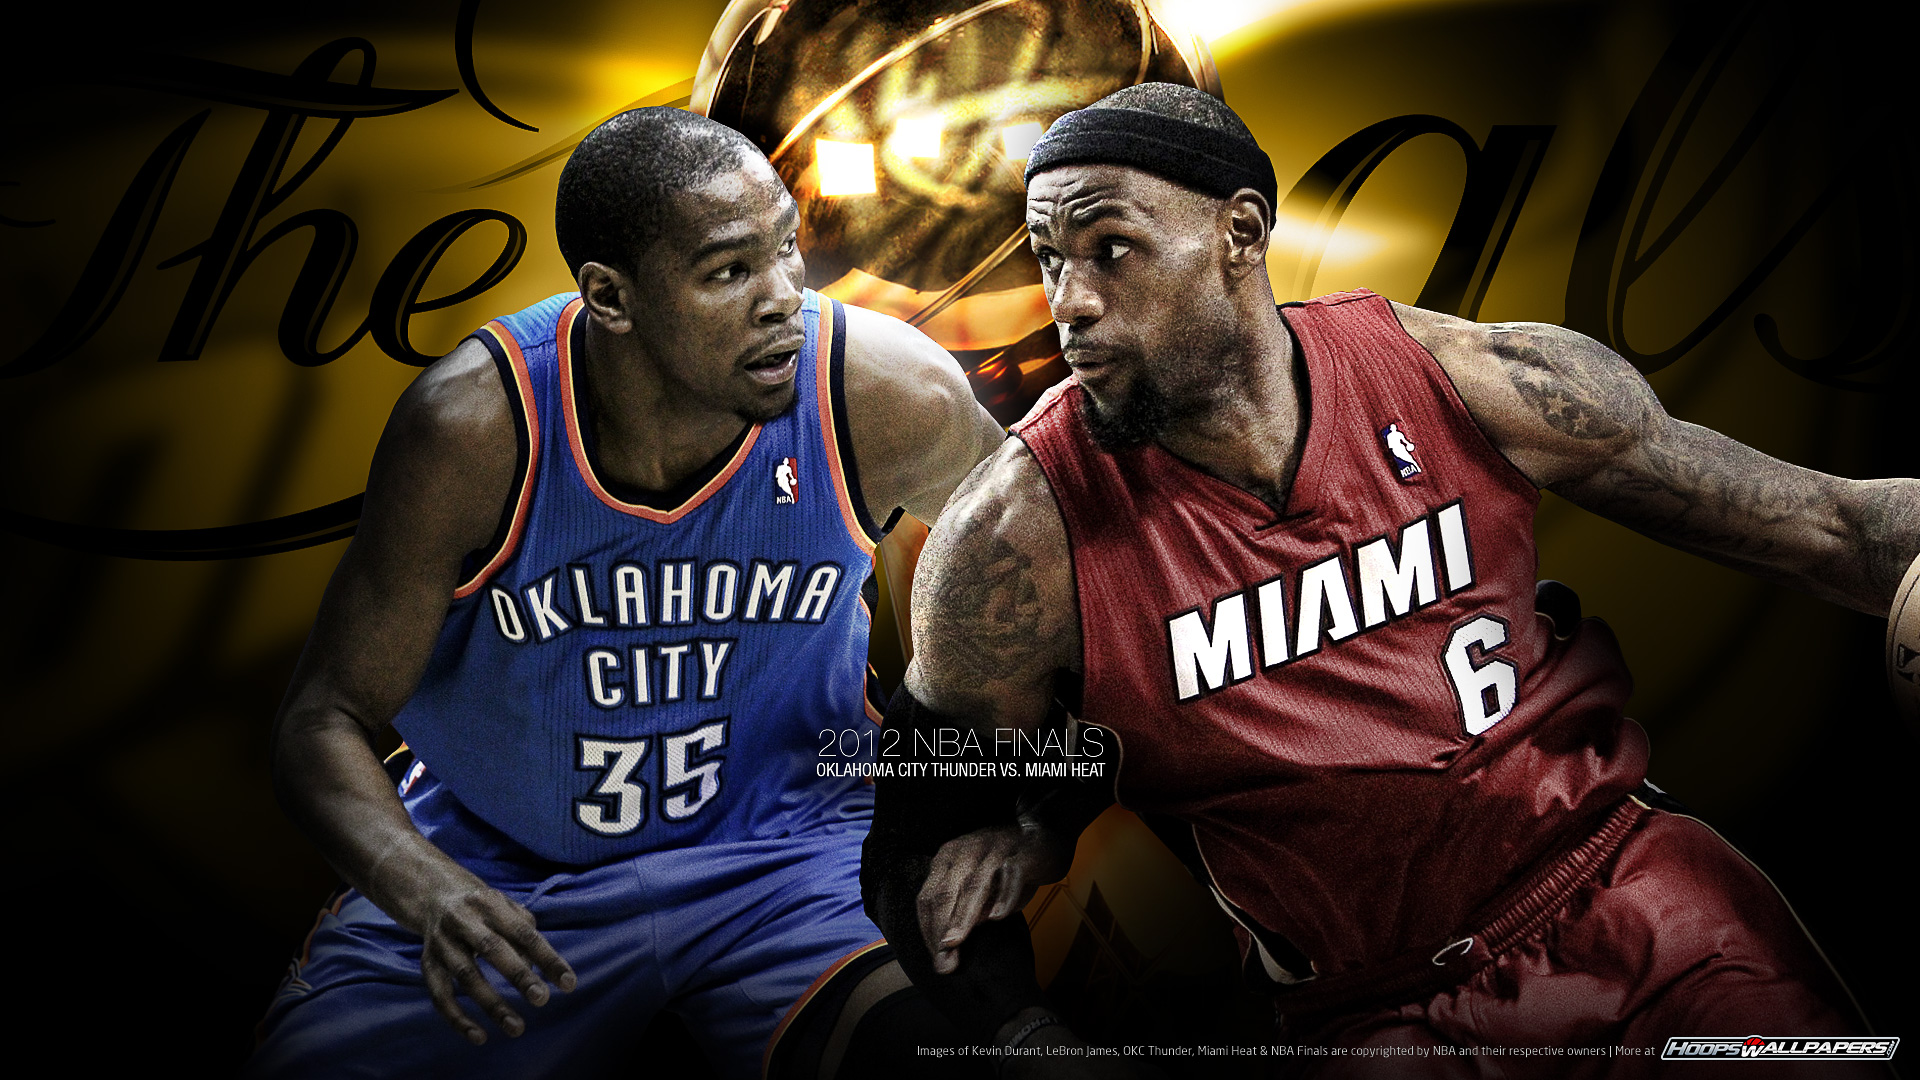 HoopsWallpapers.com – Get the latest HD and mobile NBA wallpapers today! » Miami Heat1920 x 1080